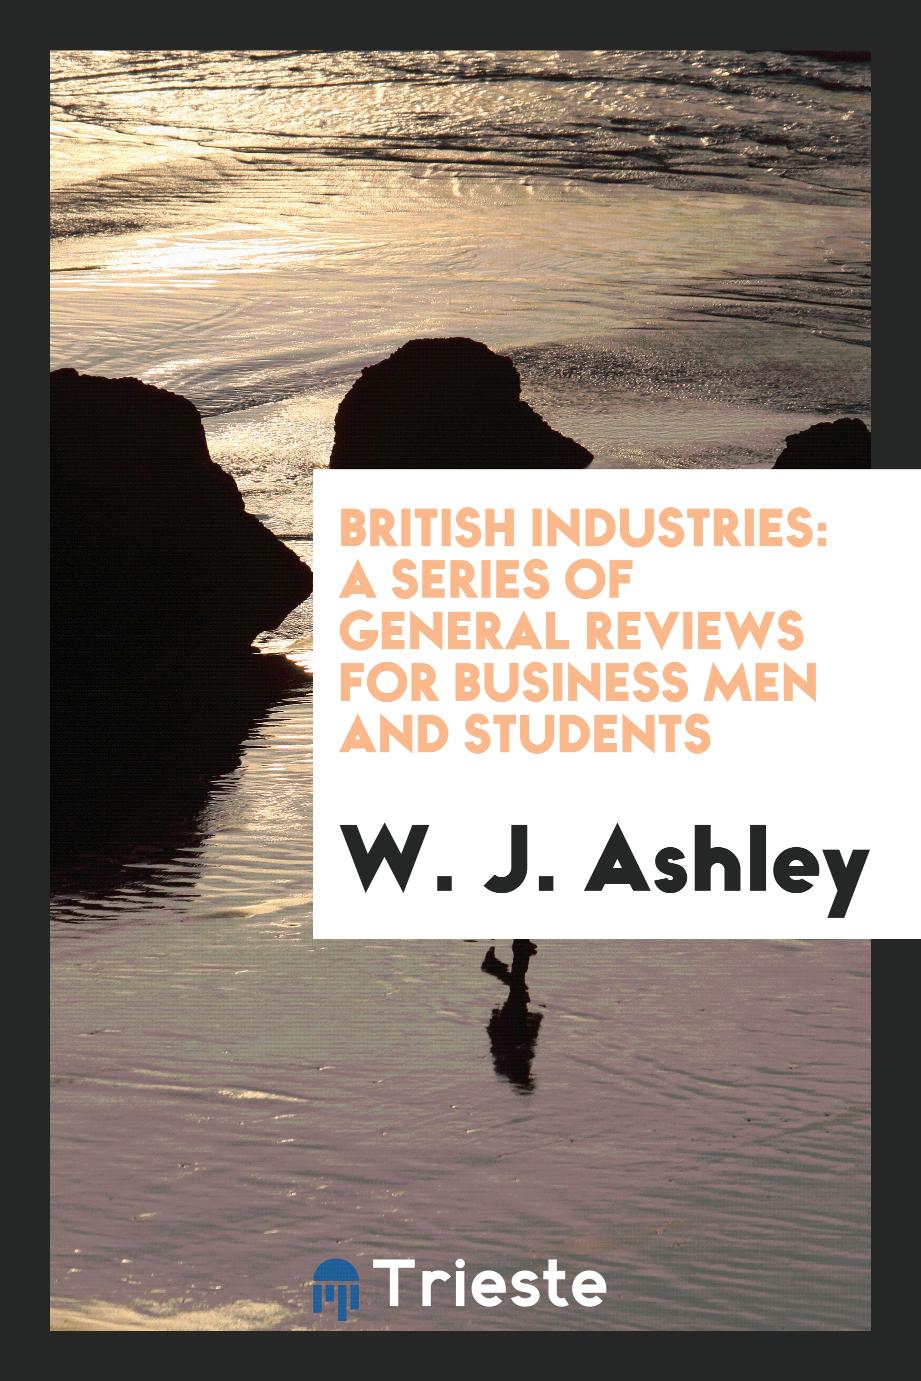 British industries: a series of general reviews for business men and students